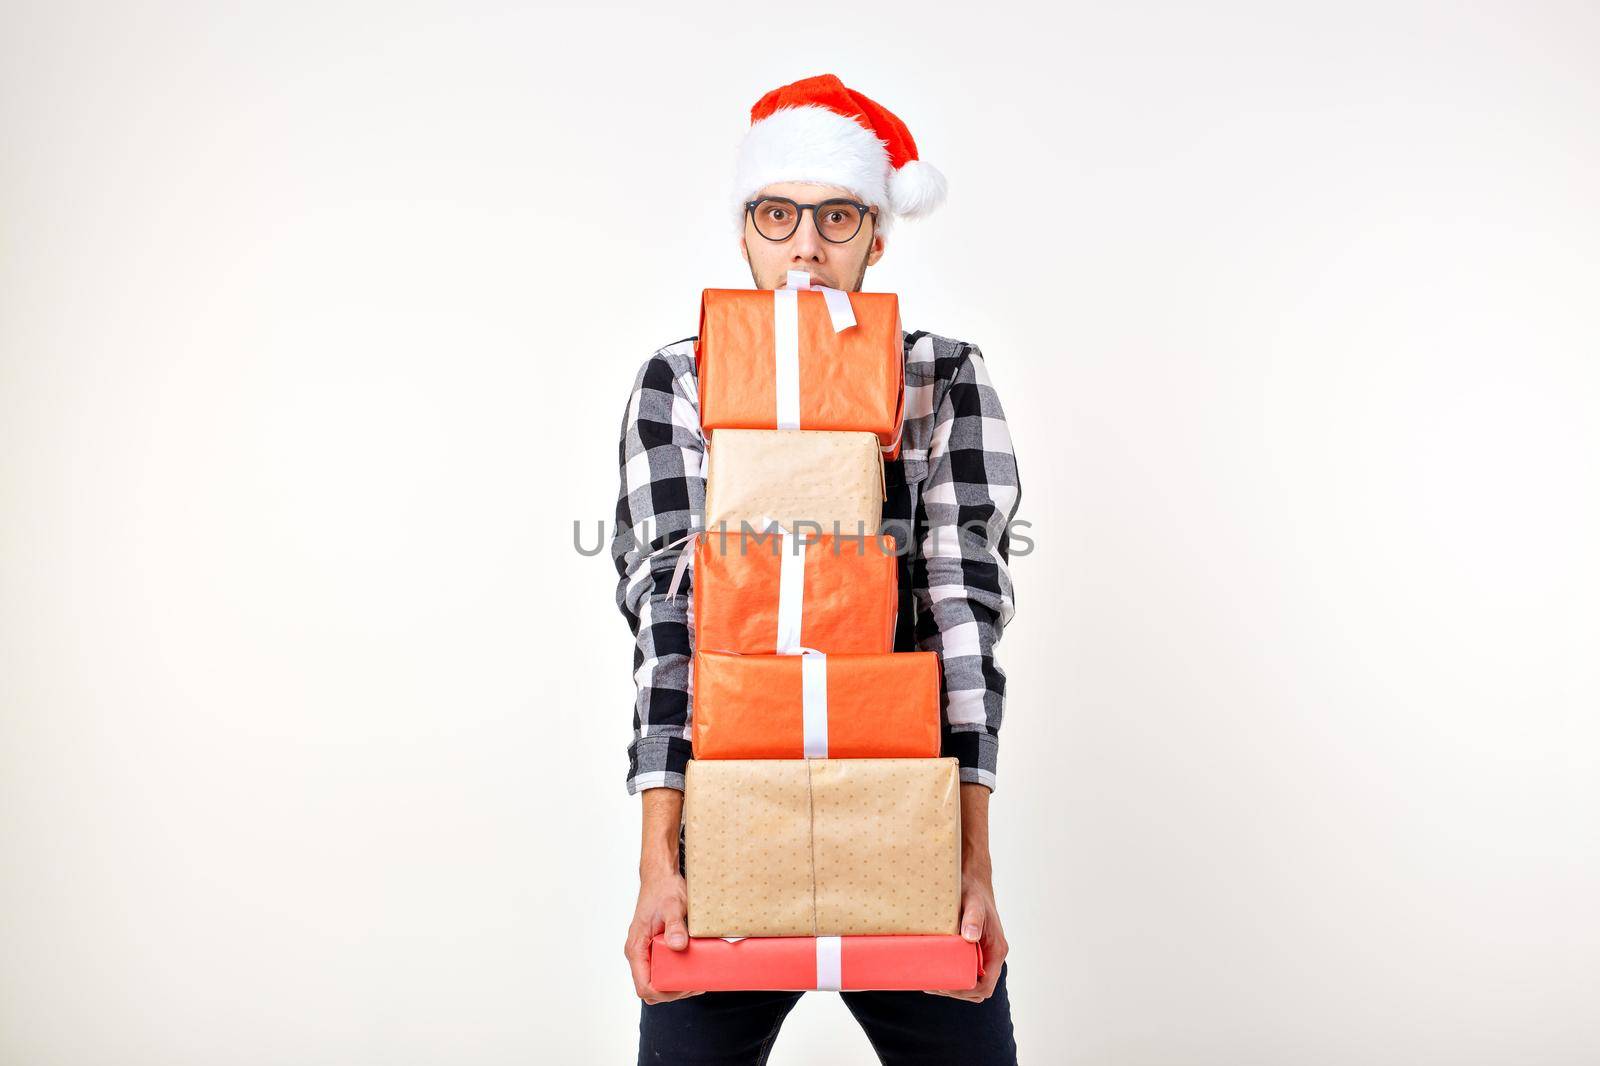 Holidays and presents concept - Funny man in Christmas hat holding many gift boxes on white background with copyspace by Satura86